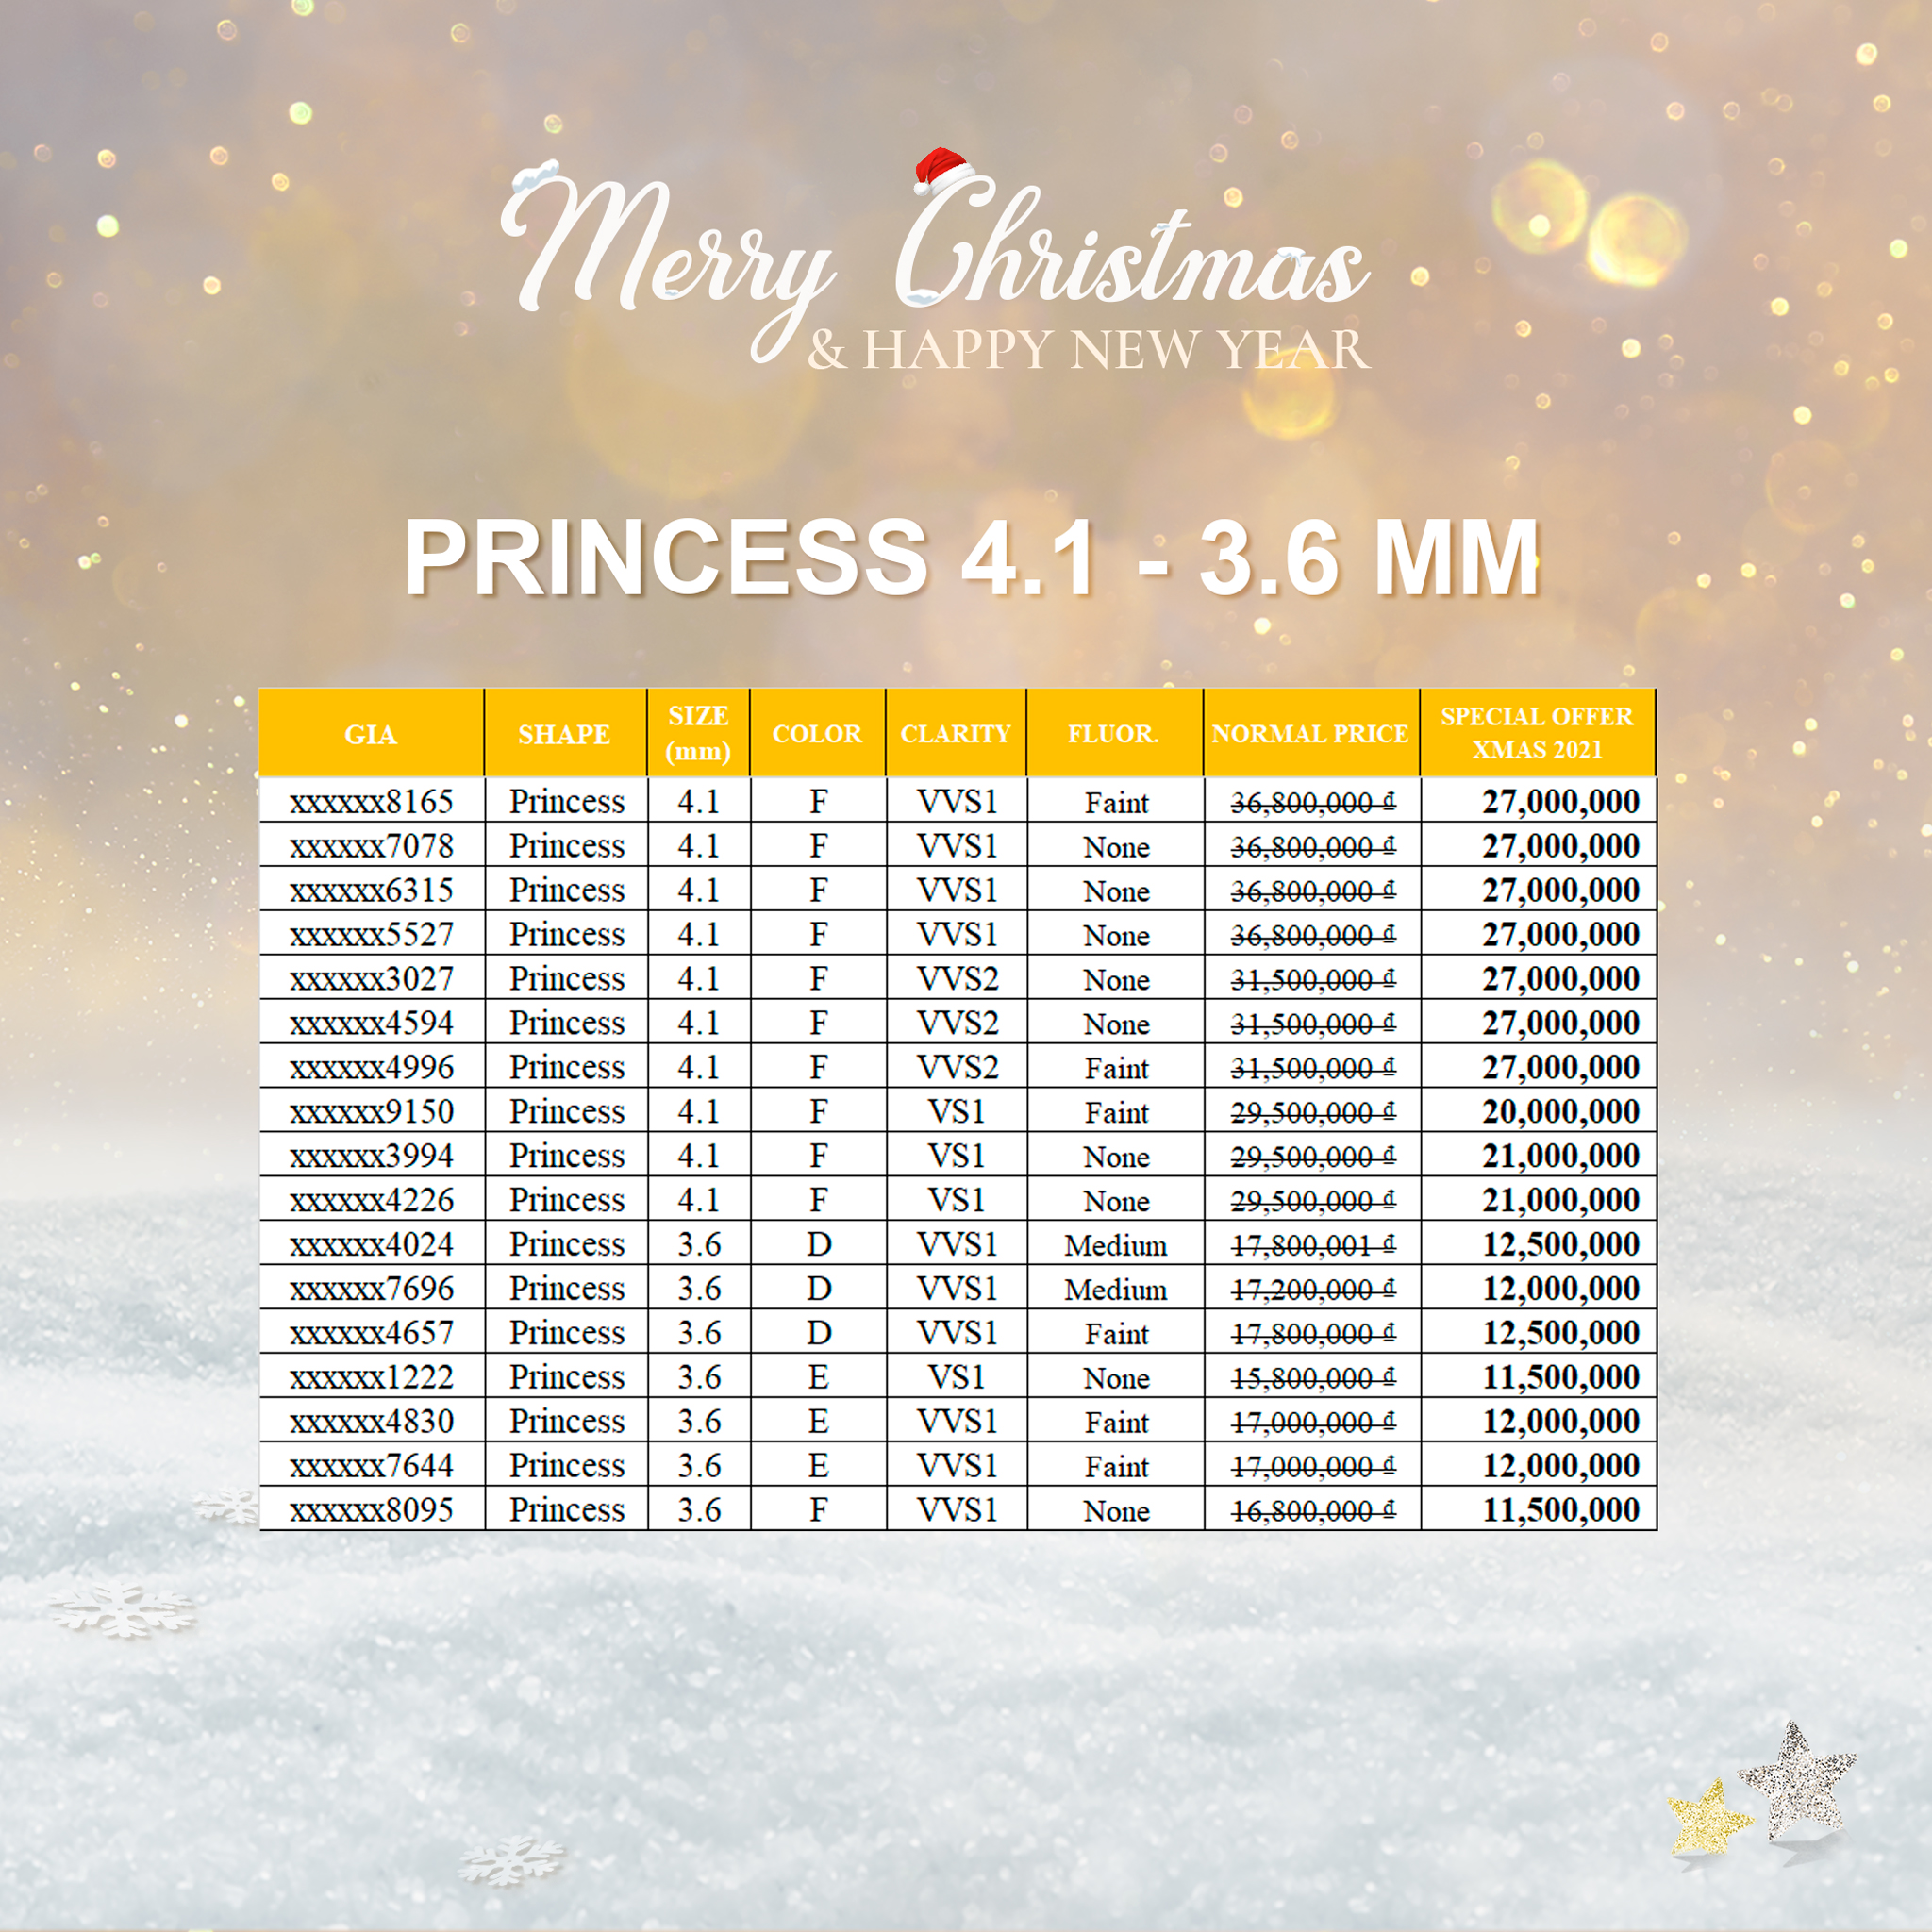 Diamond offer with a total value of over 2 billion VND - Celebrate Christmas and New Year in your style! - 4